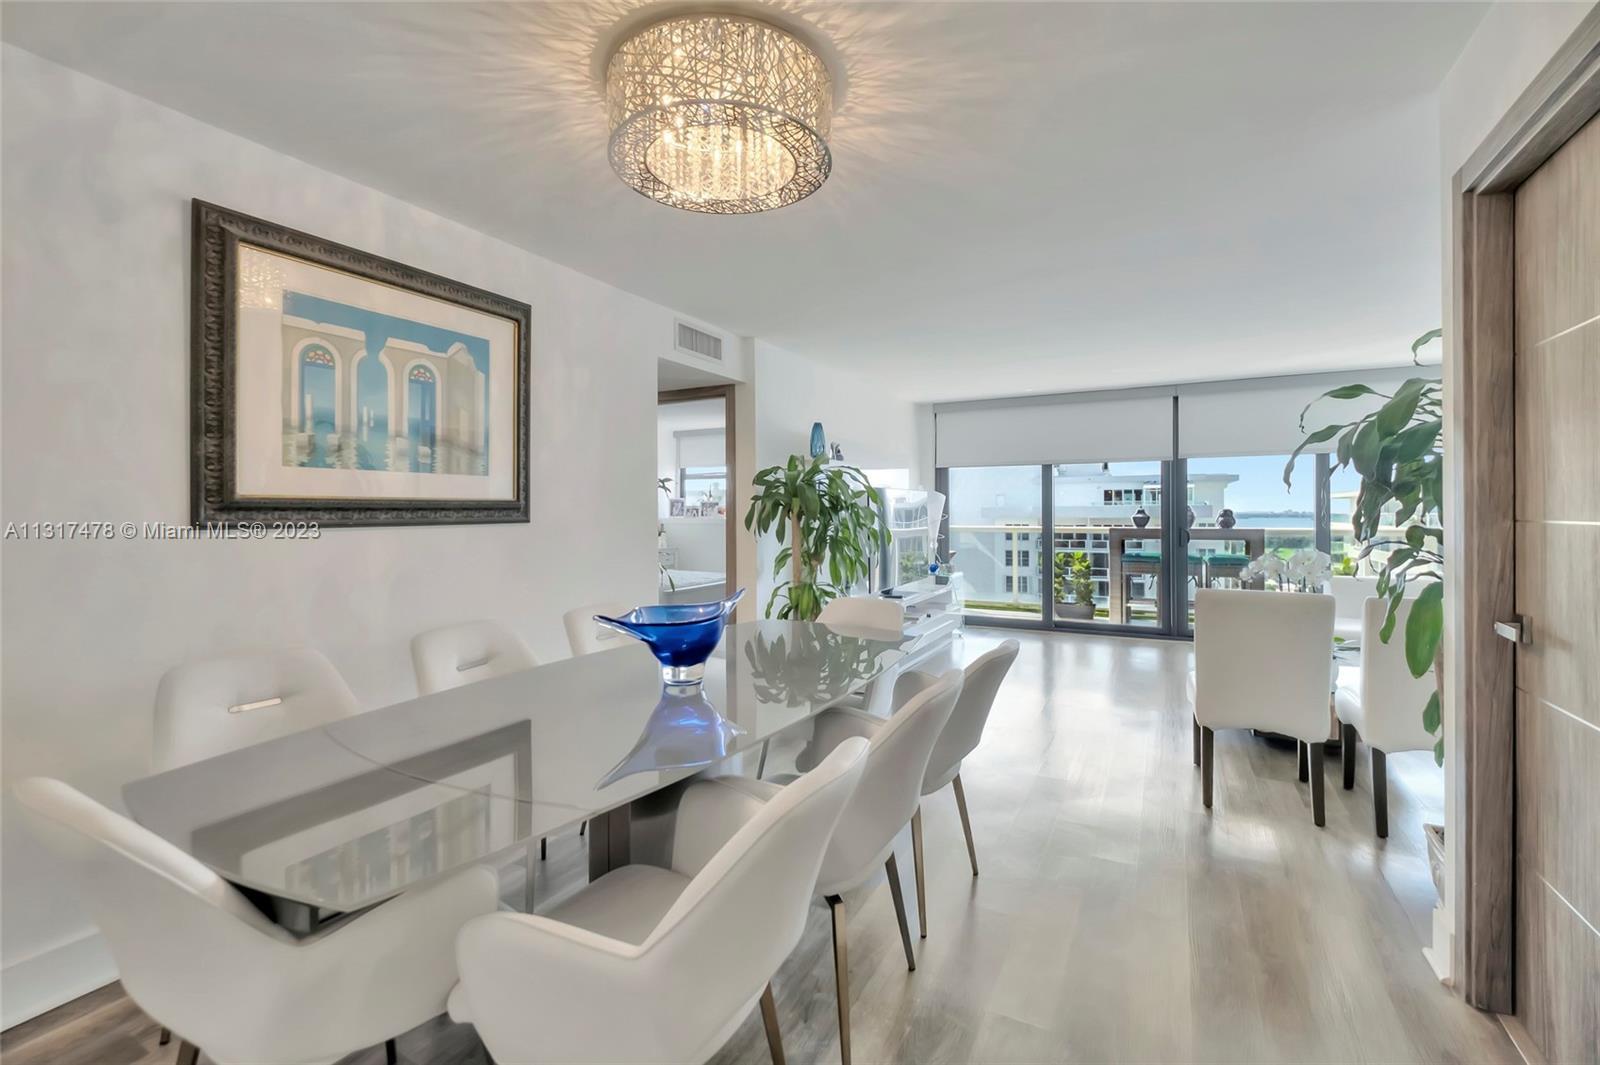 Spectacular 2/2 renovated to perfection.  Beautiful skyline and intracoastal views from all rooms wi